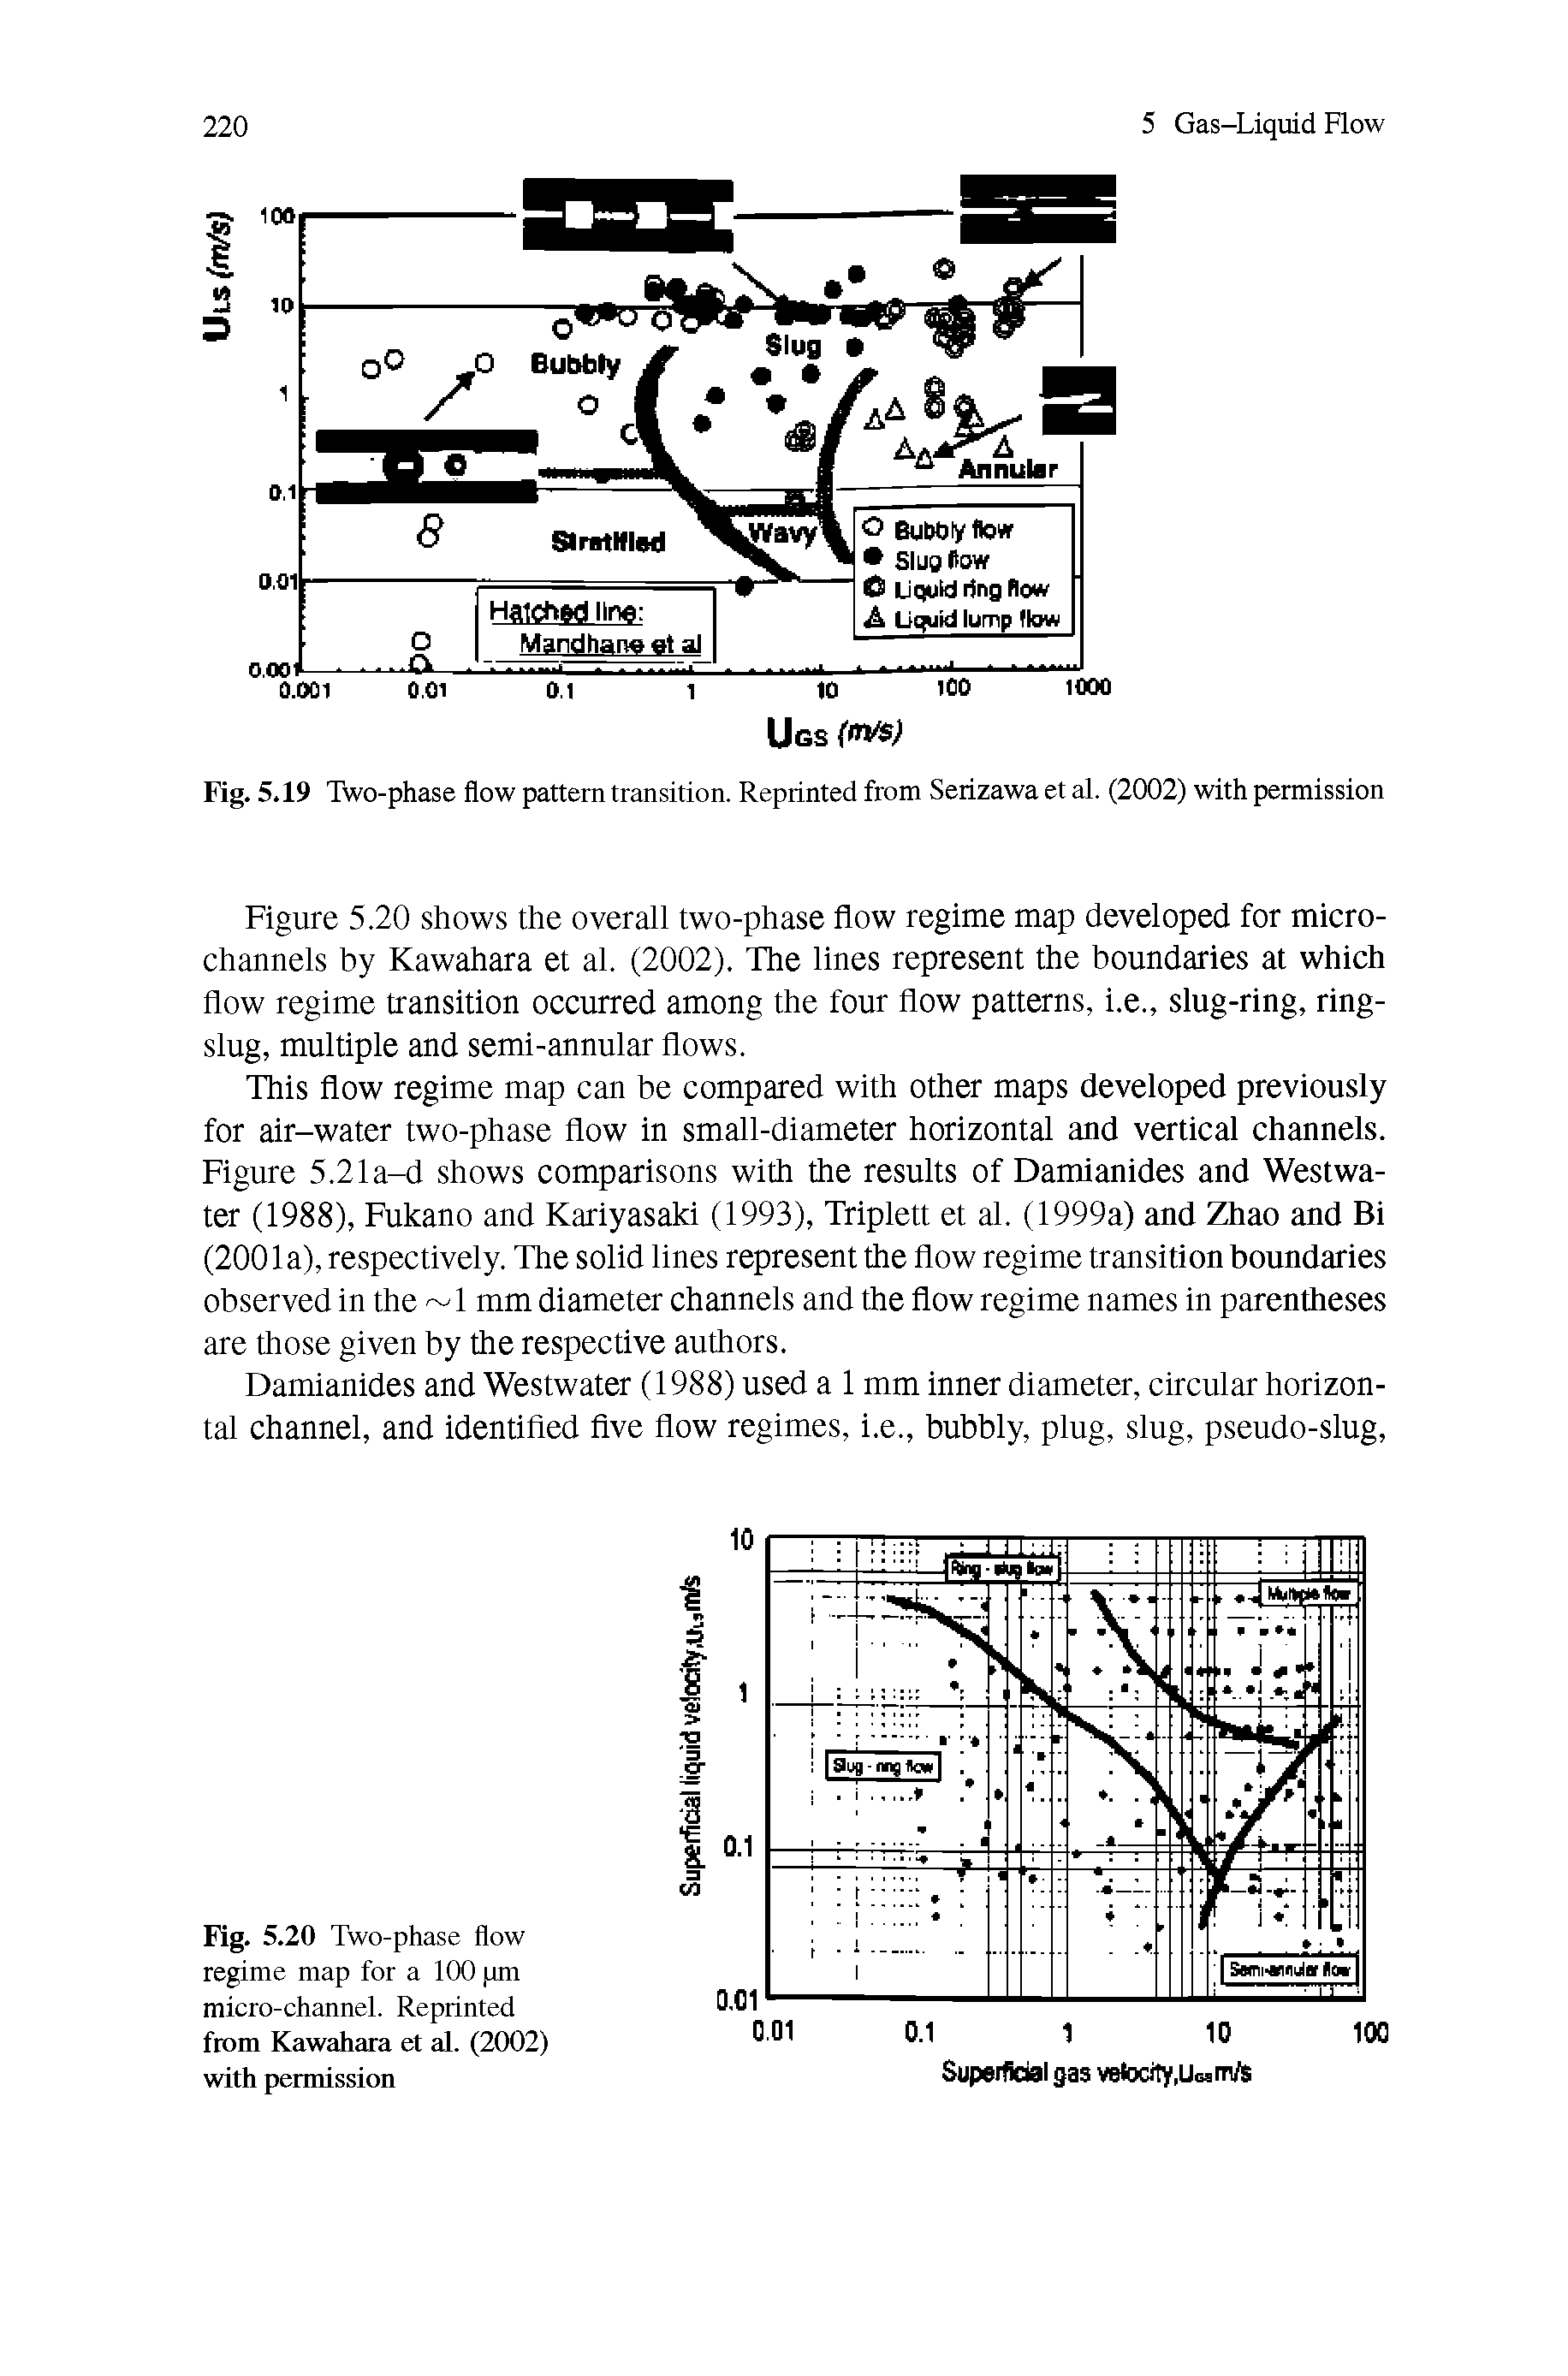 Fig. 5.19 Two-phase flow pattern transition. Reprinted from Serizawa et al. (2002) with permission...